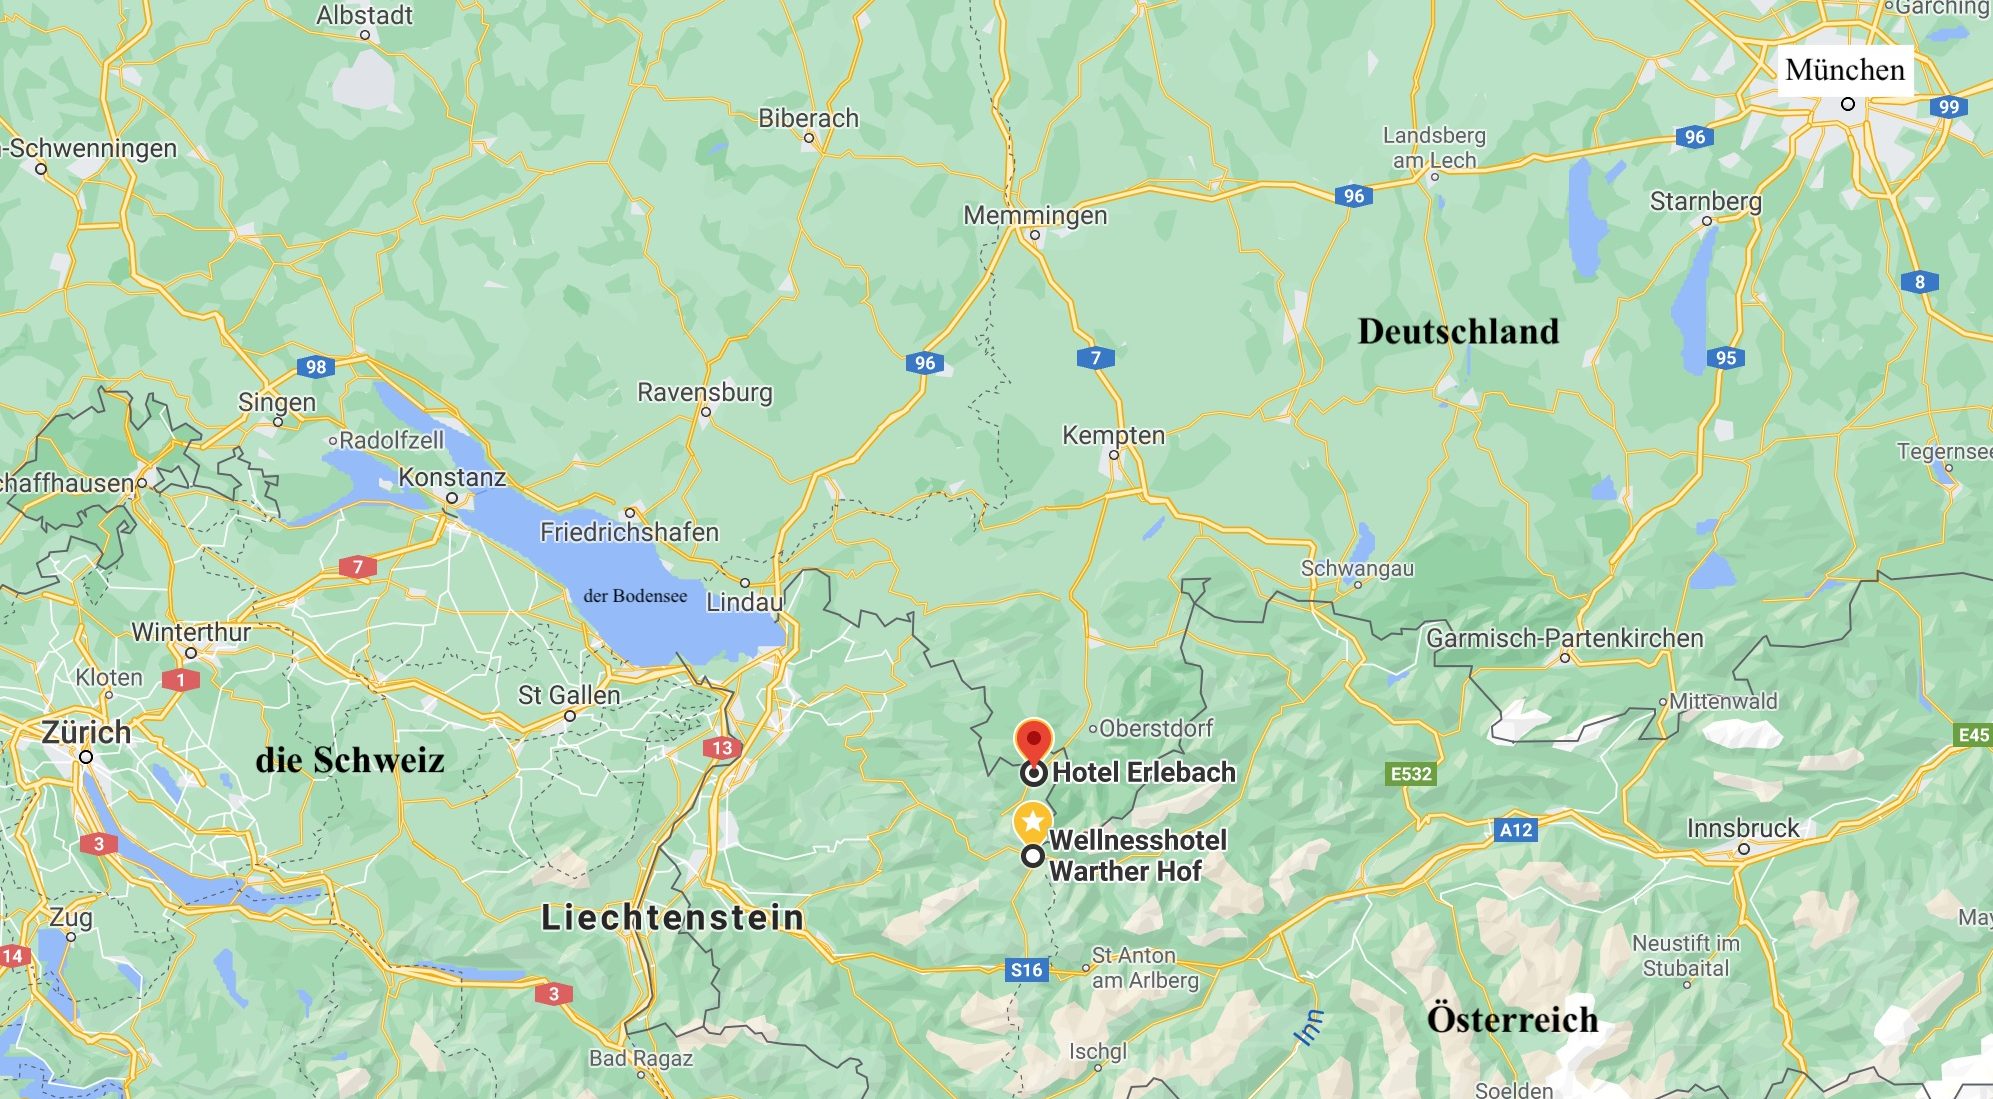 screenshot from google maps of the two hotels we will read about next in Austria